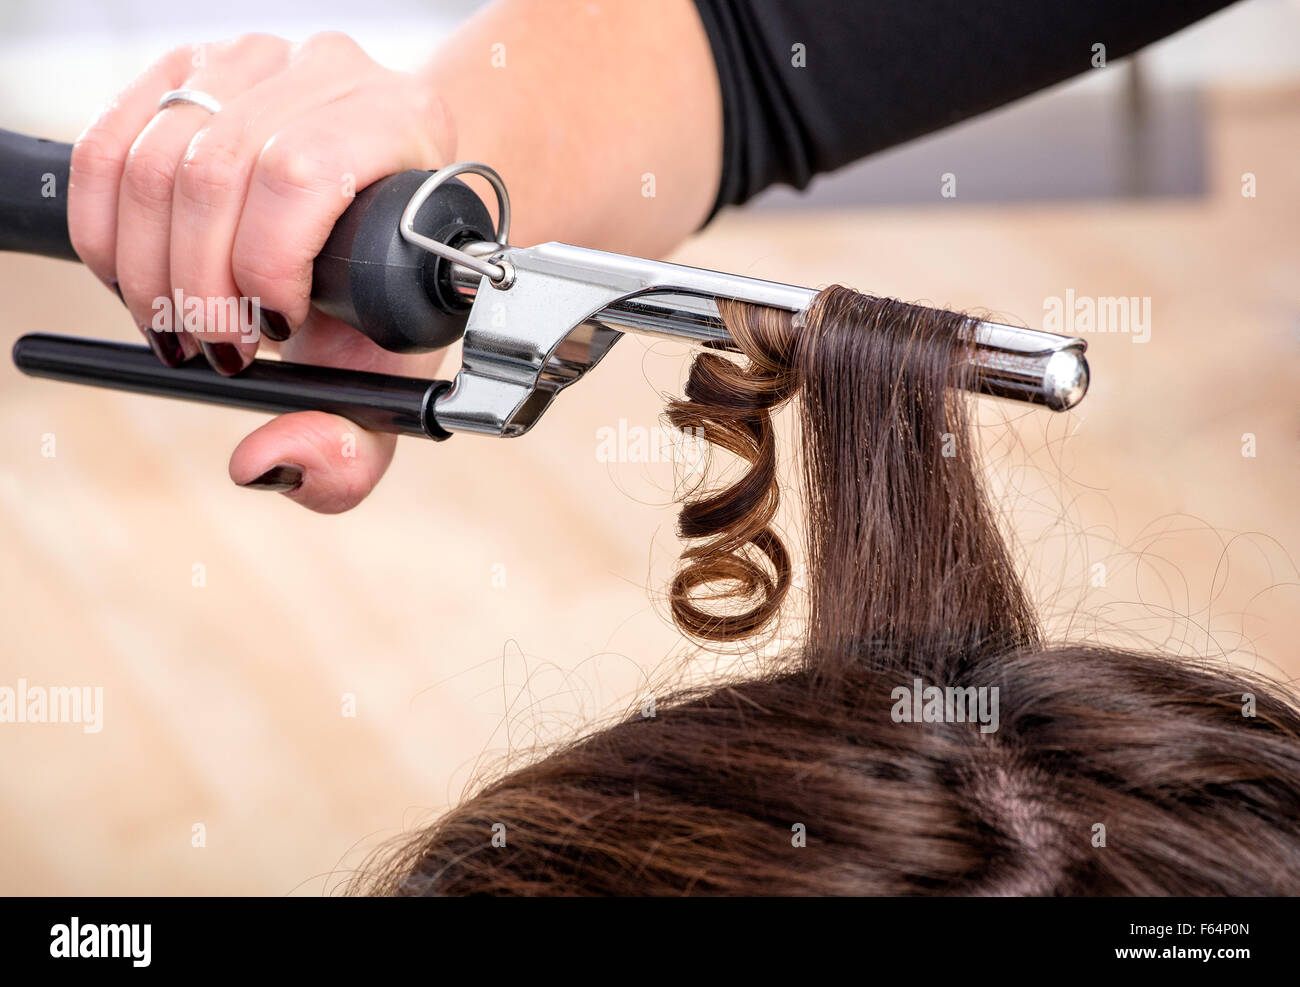 Hairstylist using a curling iron or tongs to firm ringlets in the long brown hair of a female client Stock Photo